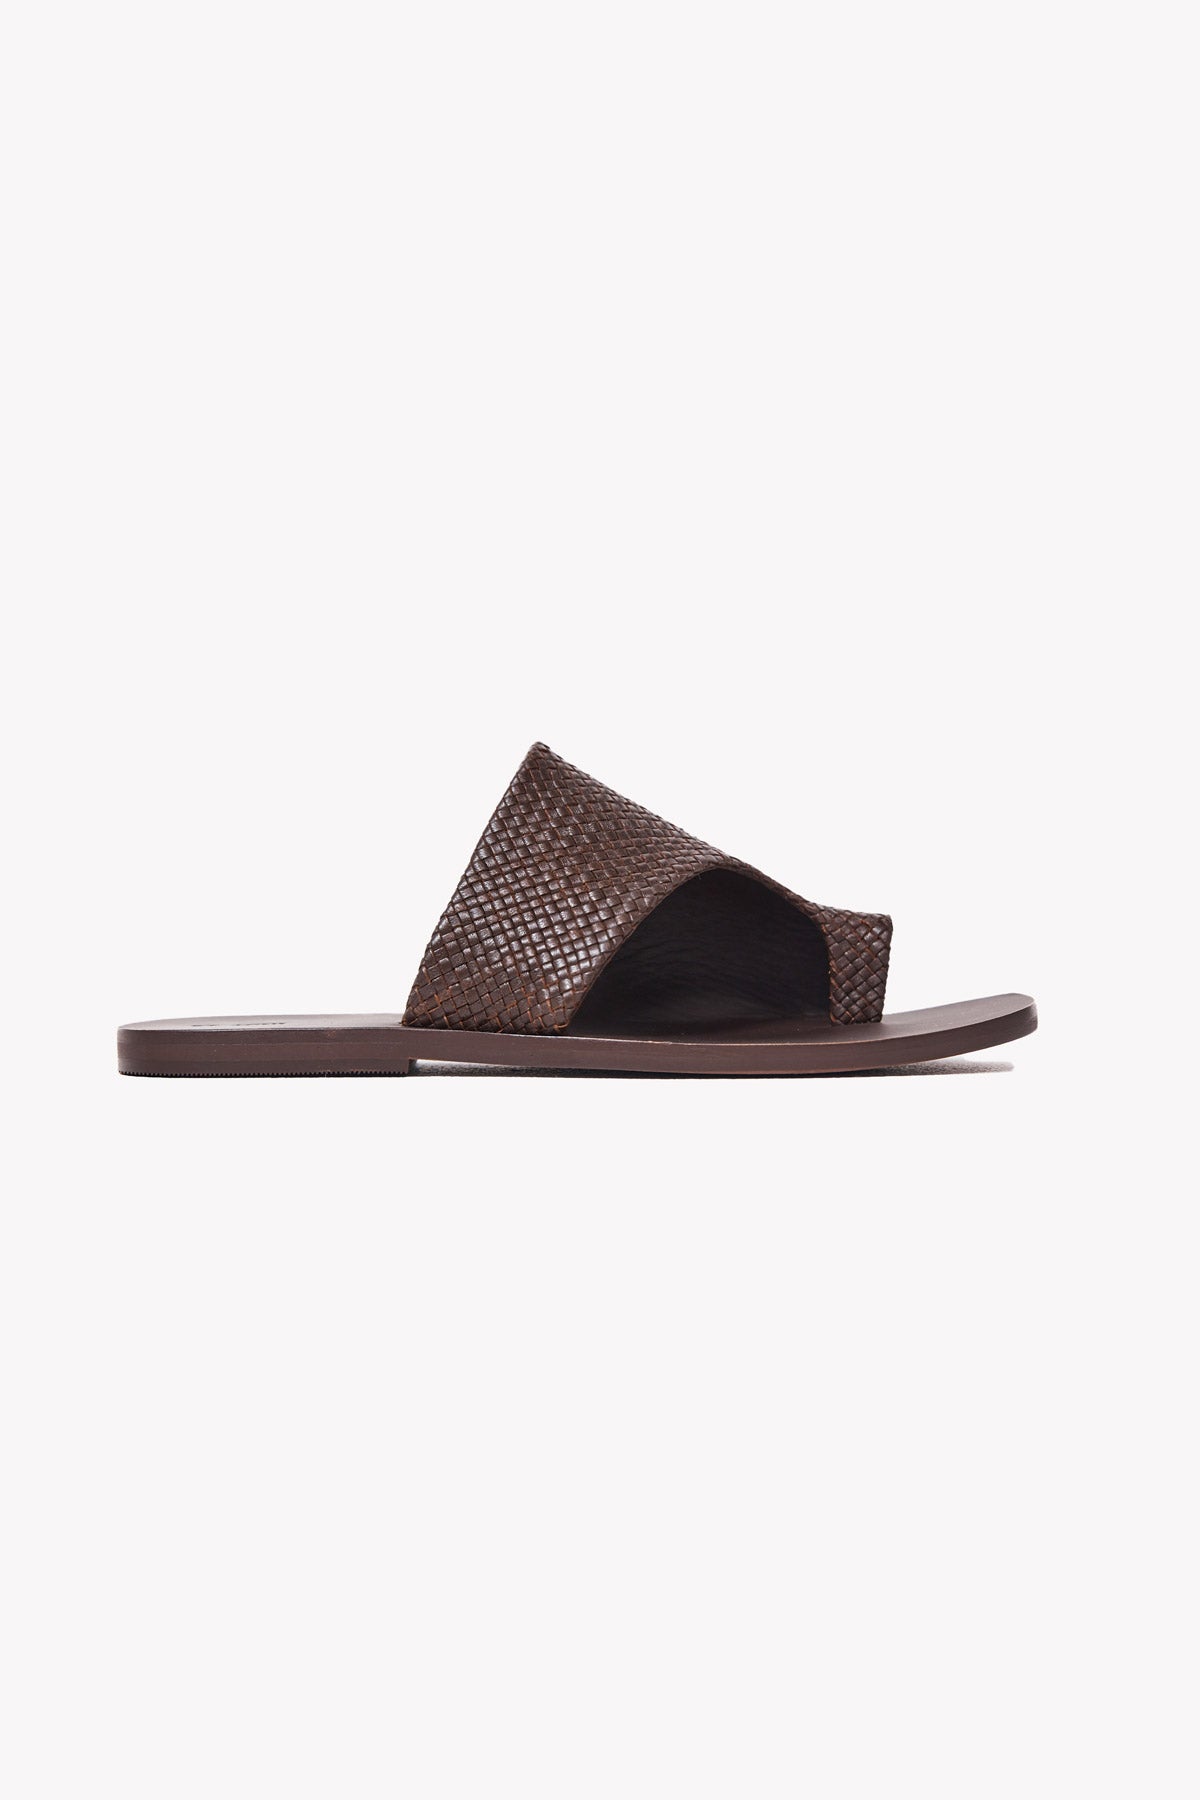 Woven Abstract Slide - Chocolate